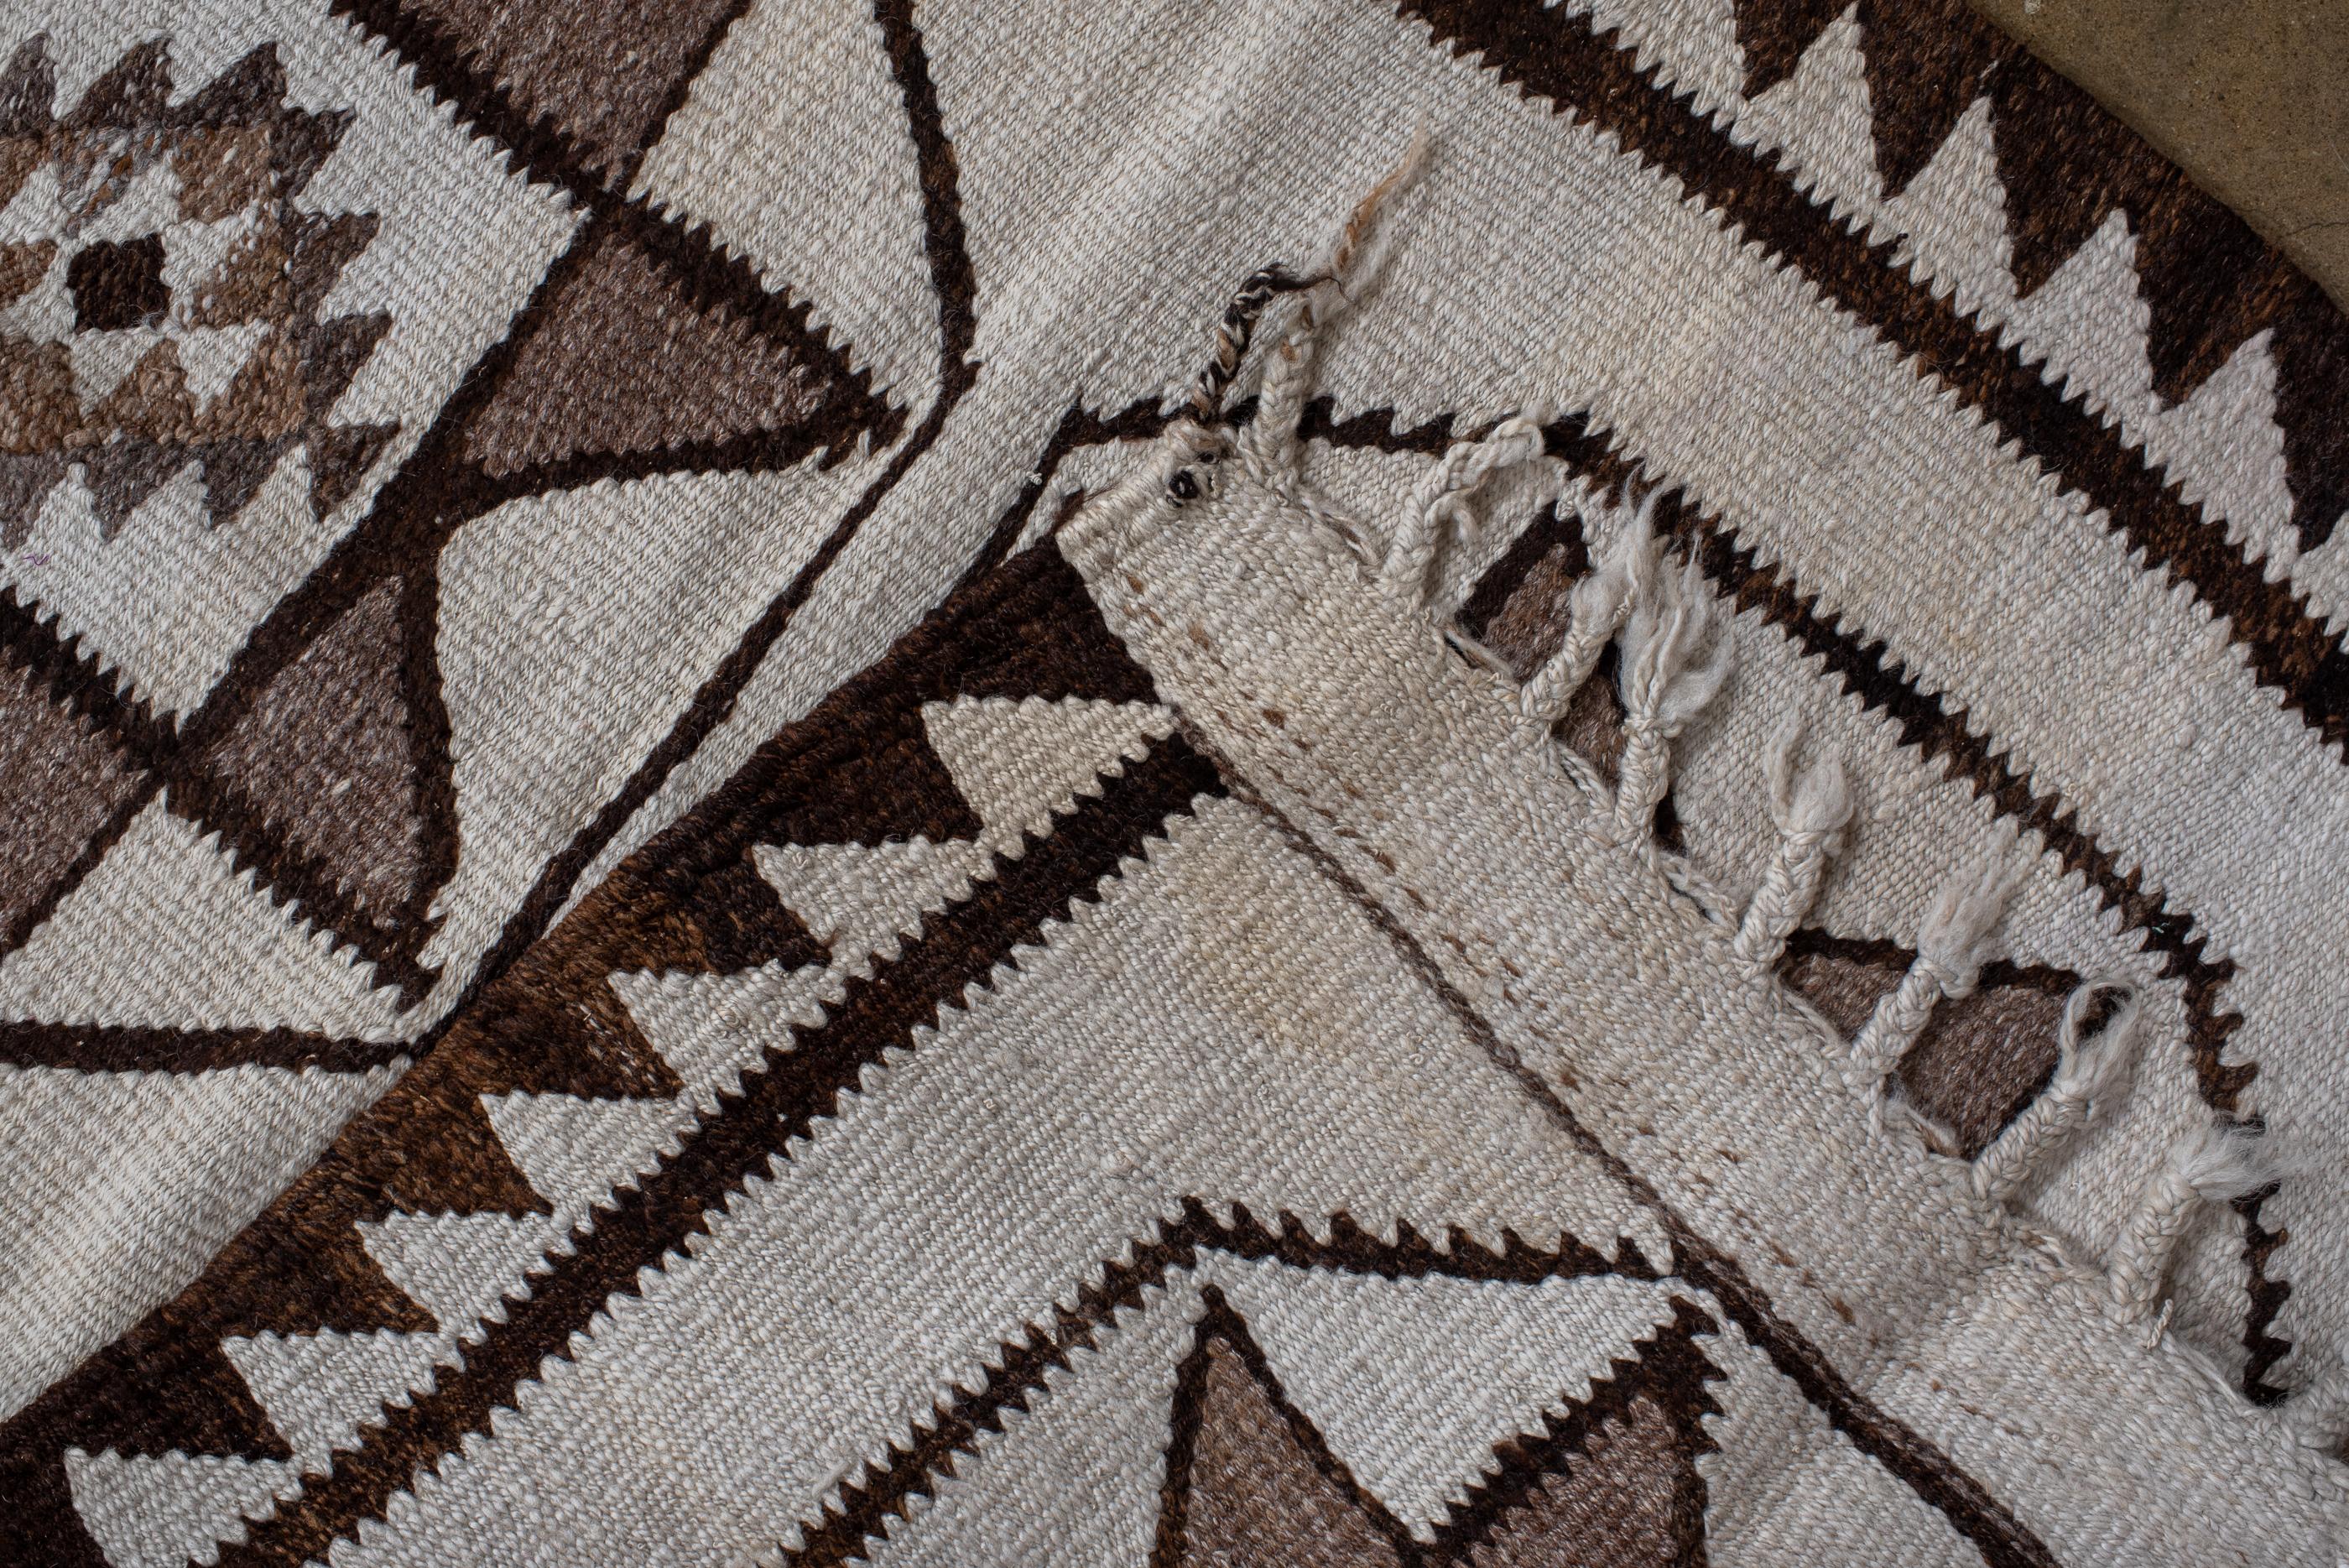 20th Century Antique Kilim Runner with Cream Field and Tassels on Ends